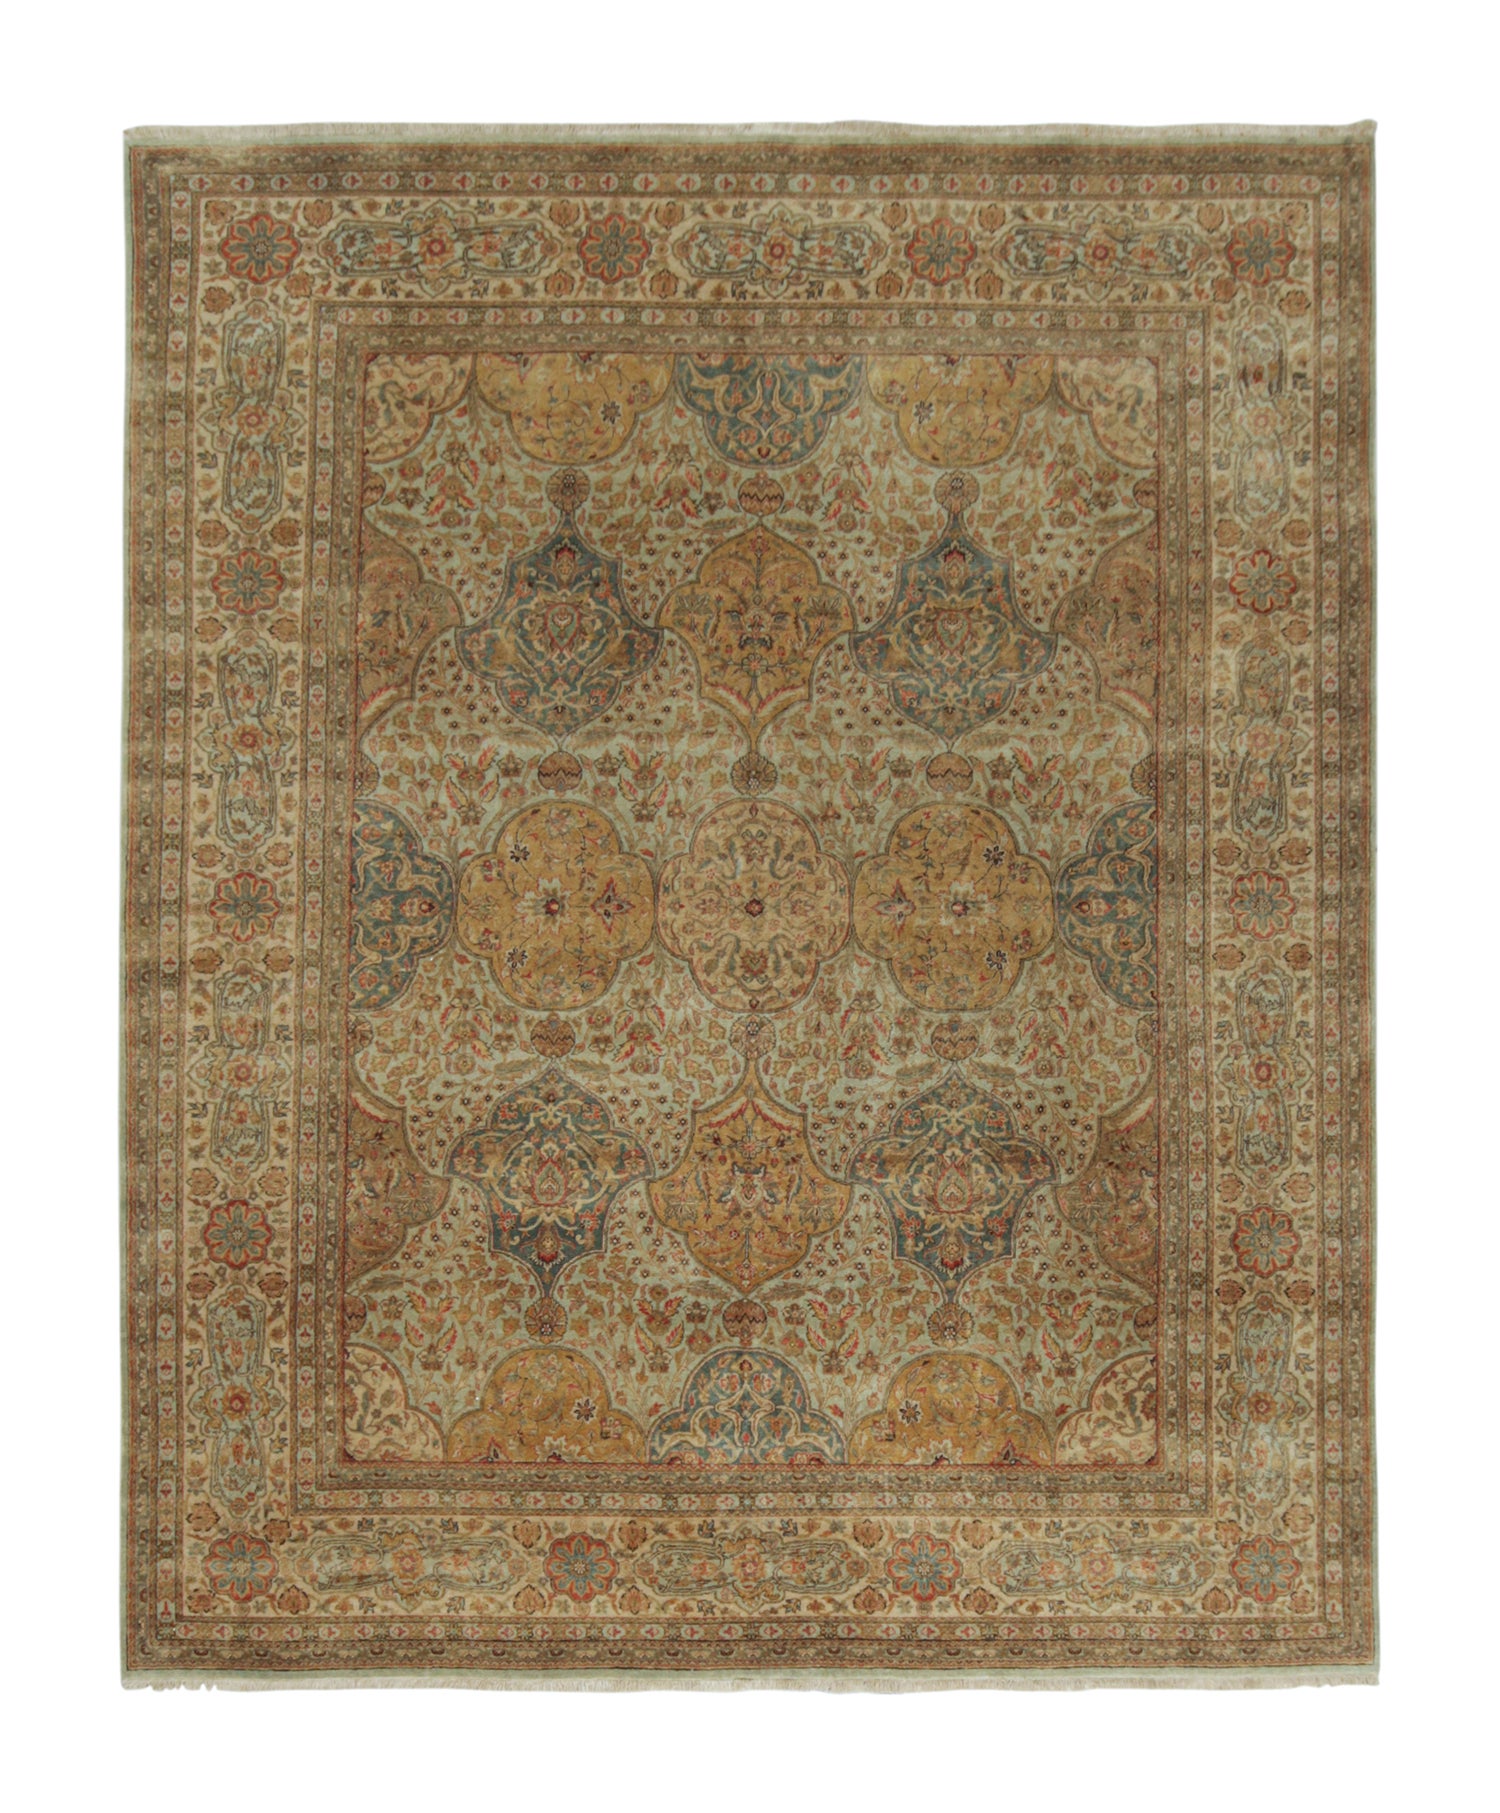 Rug & Kilim’s Classic style rug with Gold, Beige and Green Floral patterns For Sale